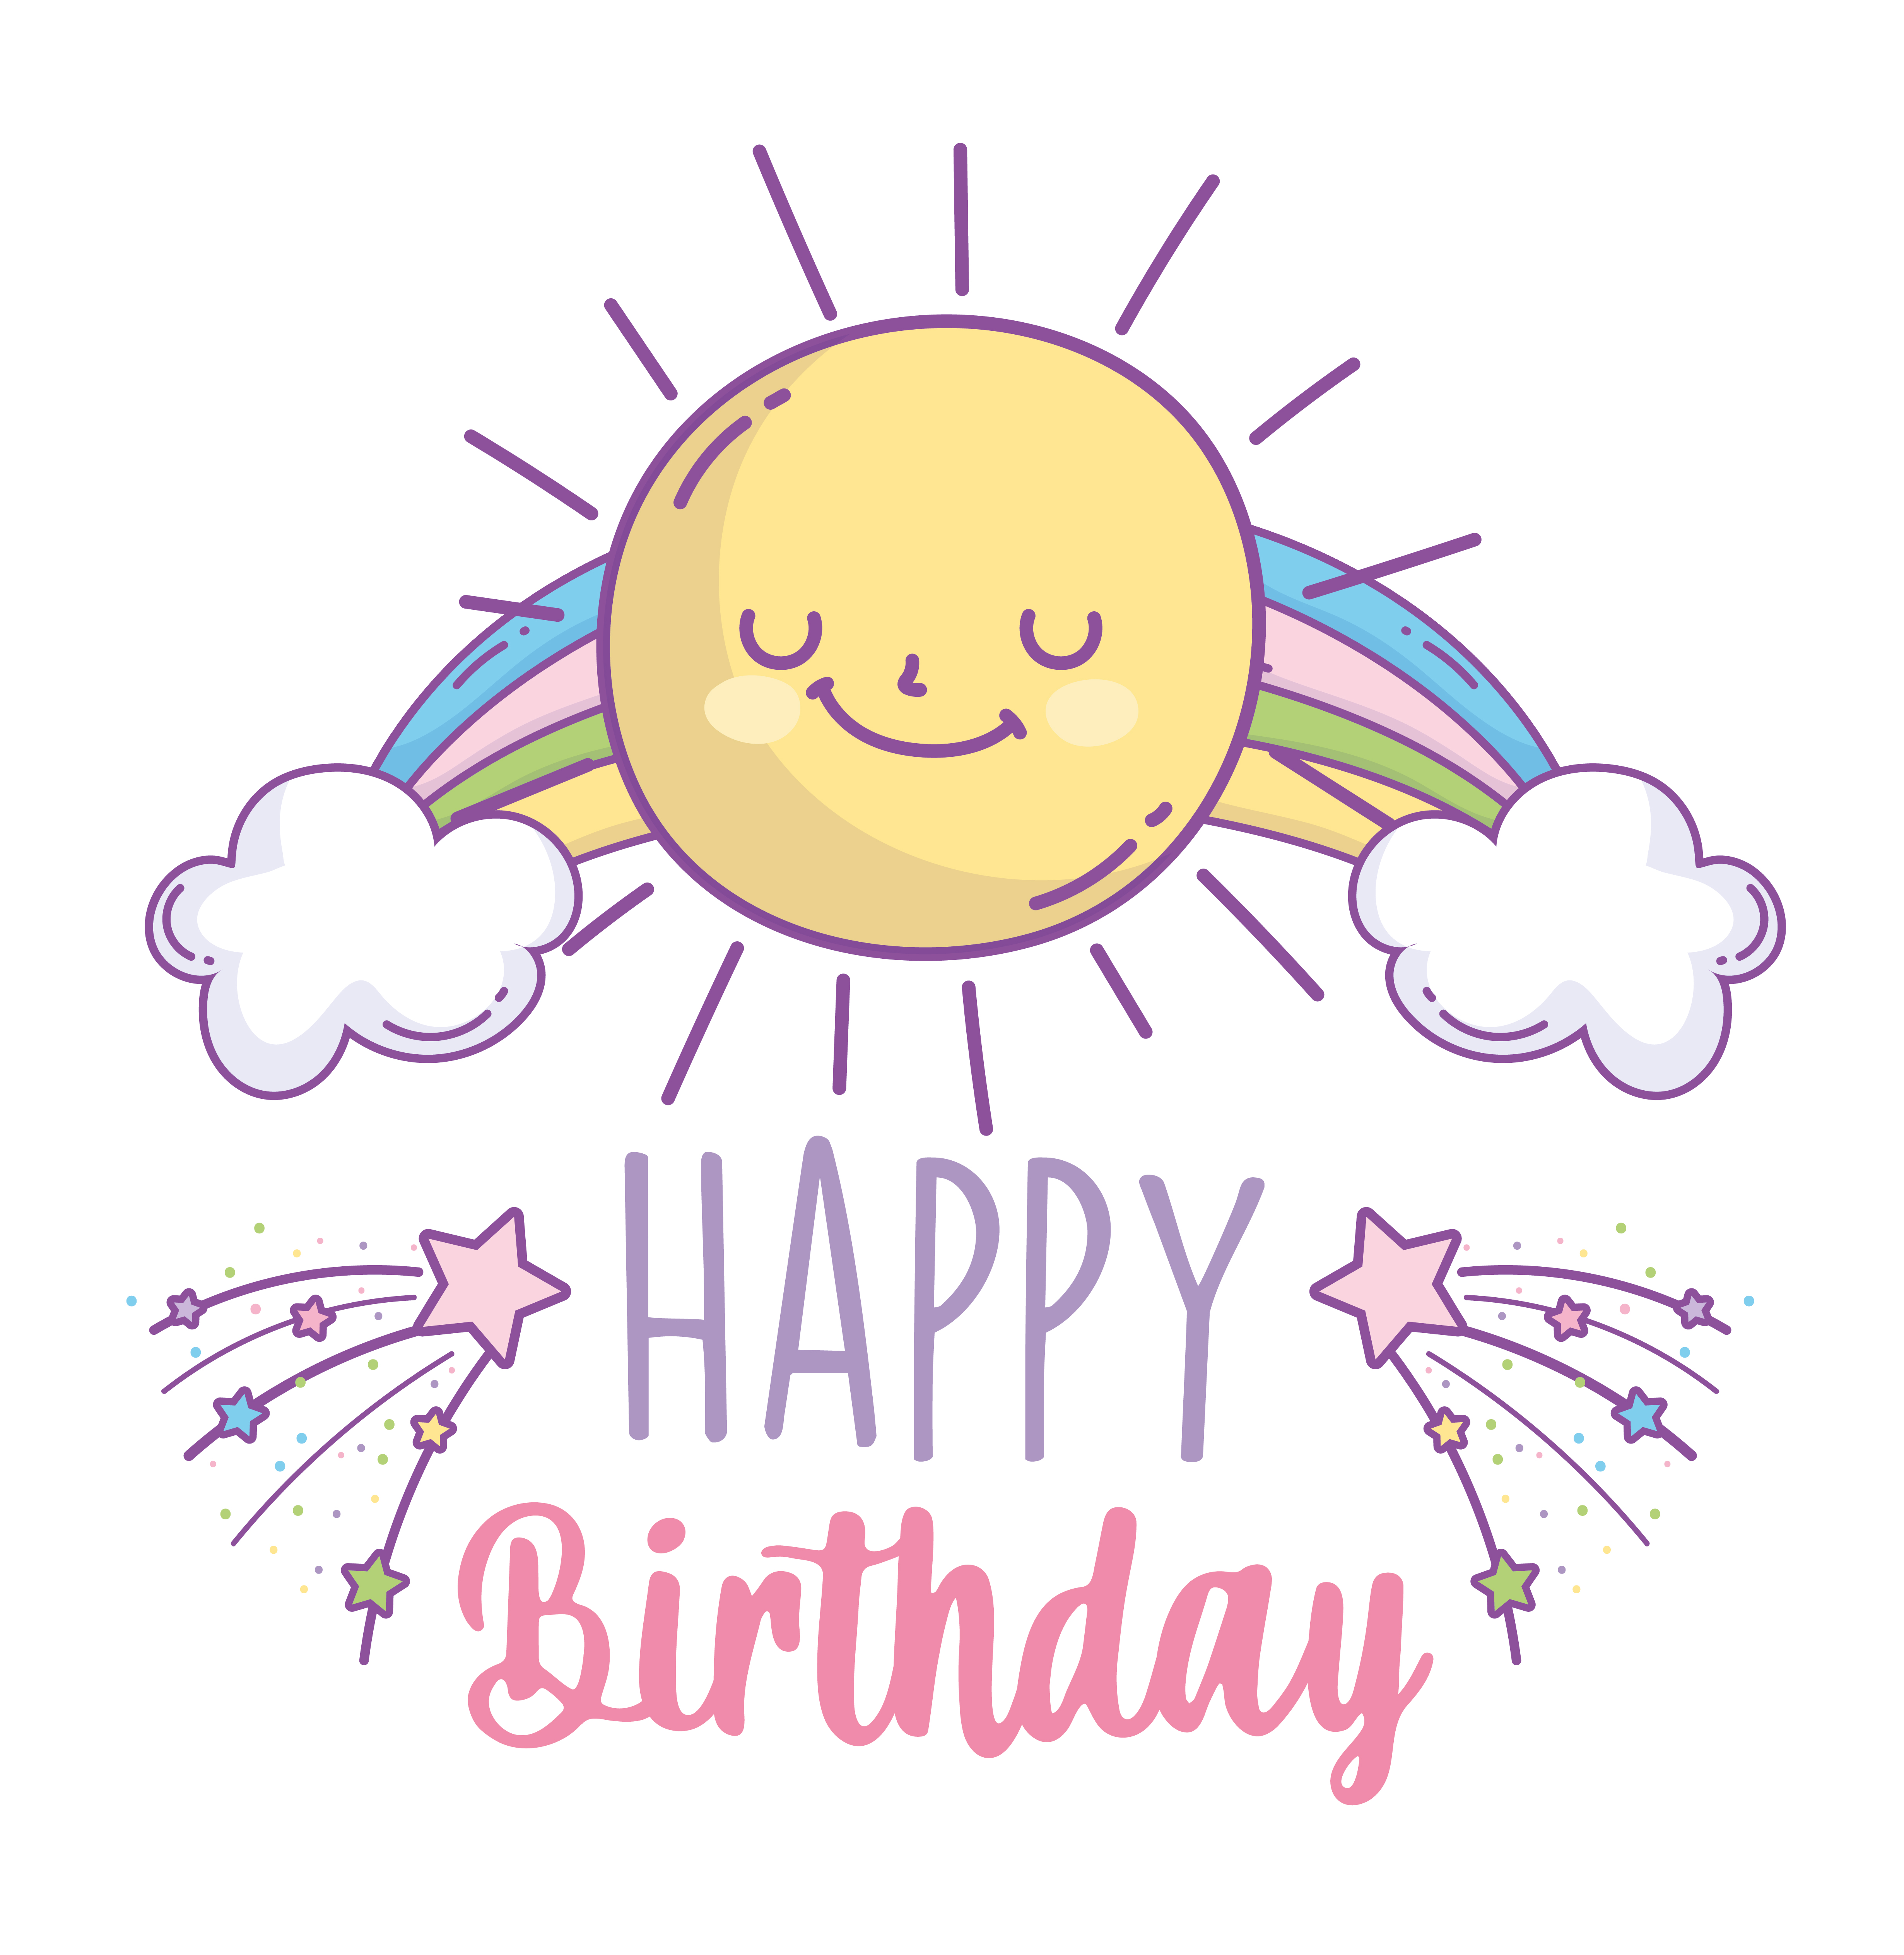 Download Happy birthday card with sun and rainbow - Download Free ...